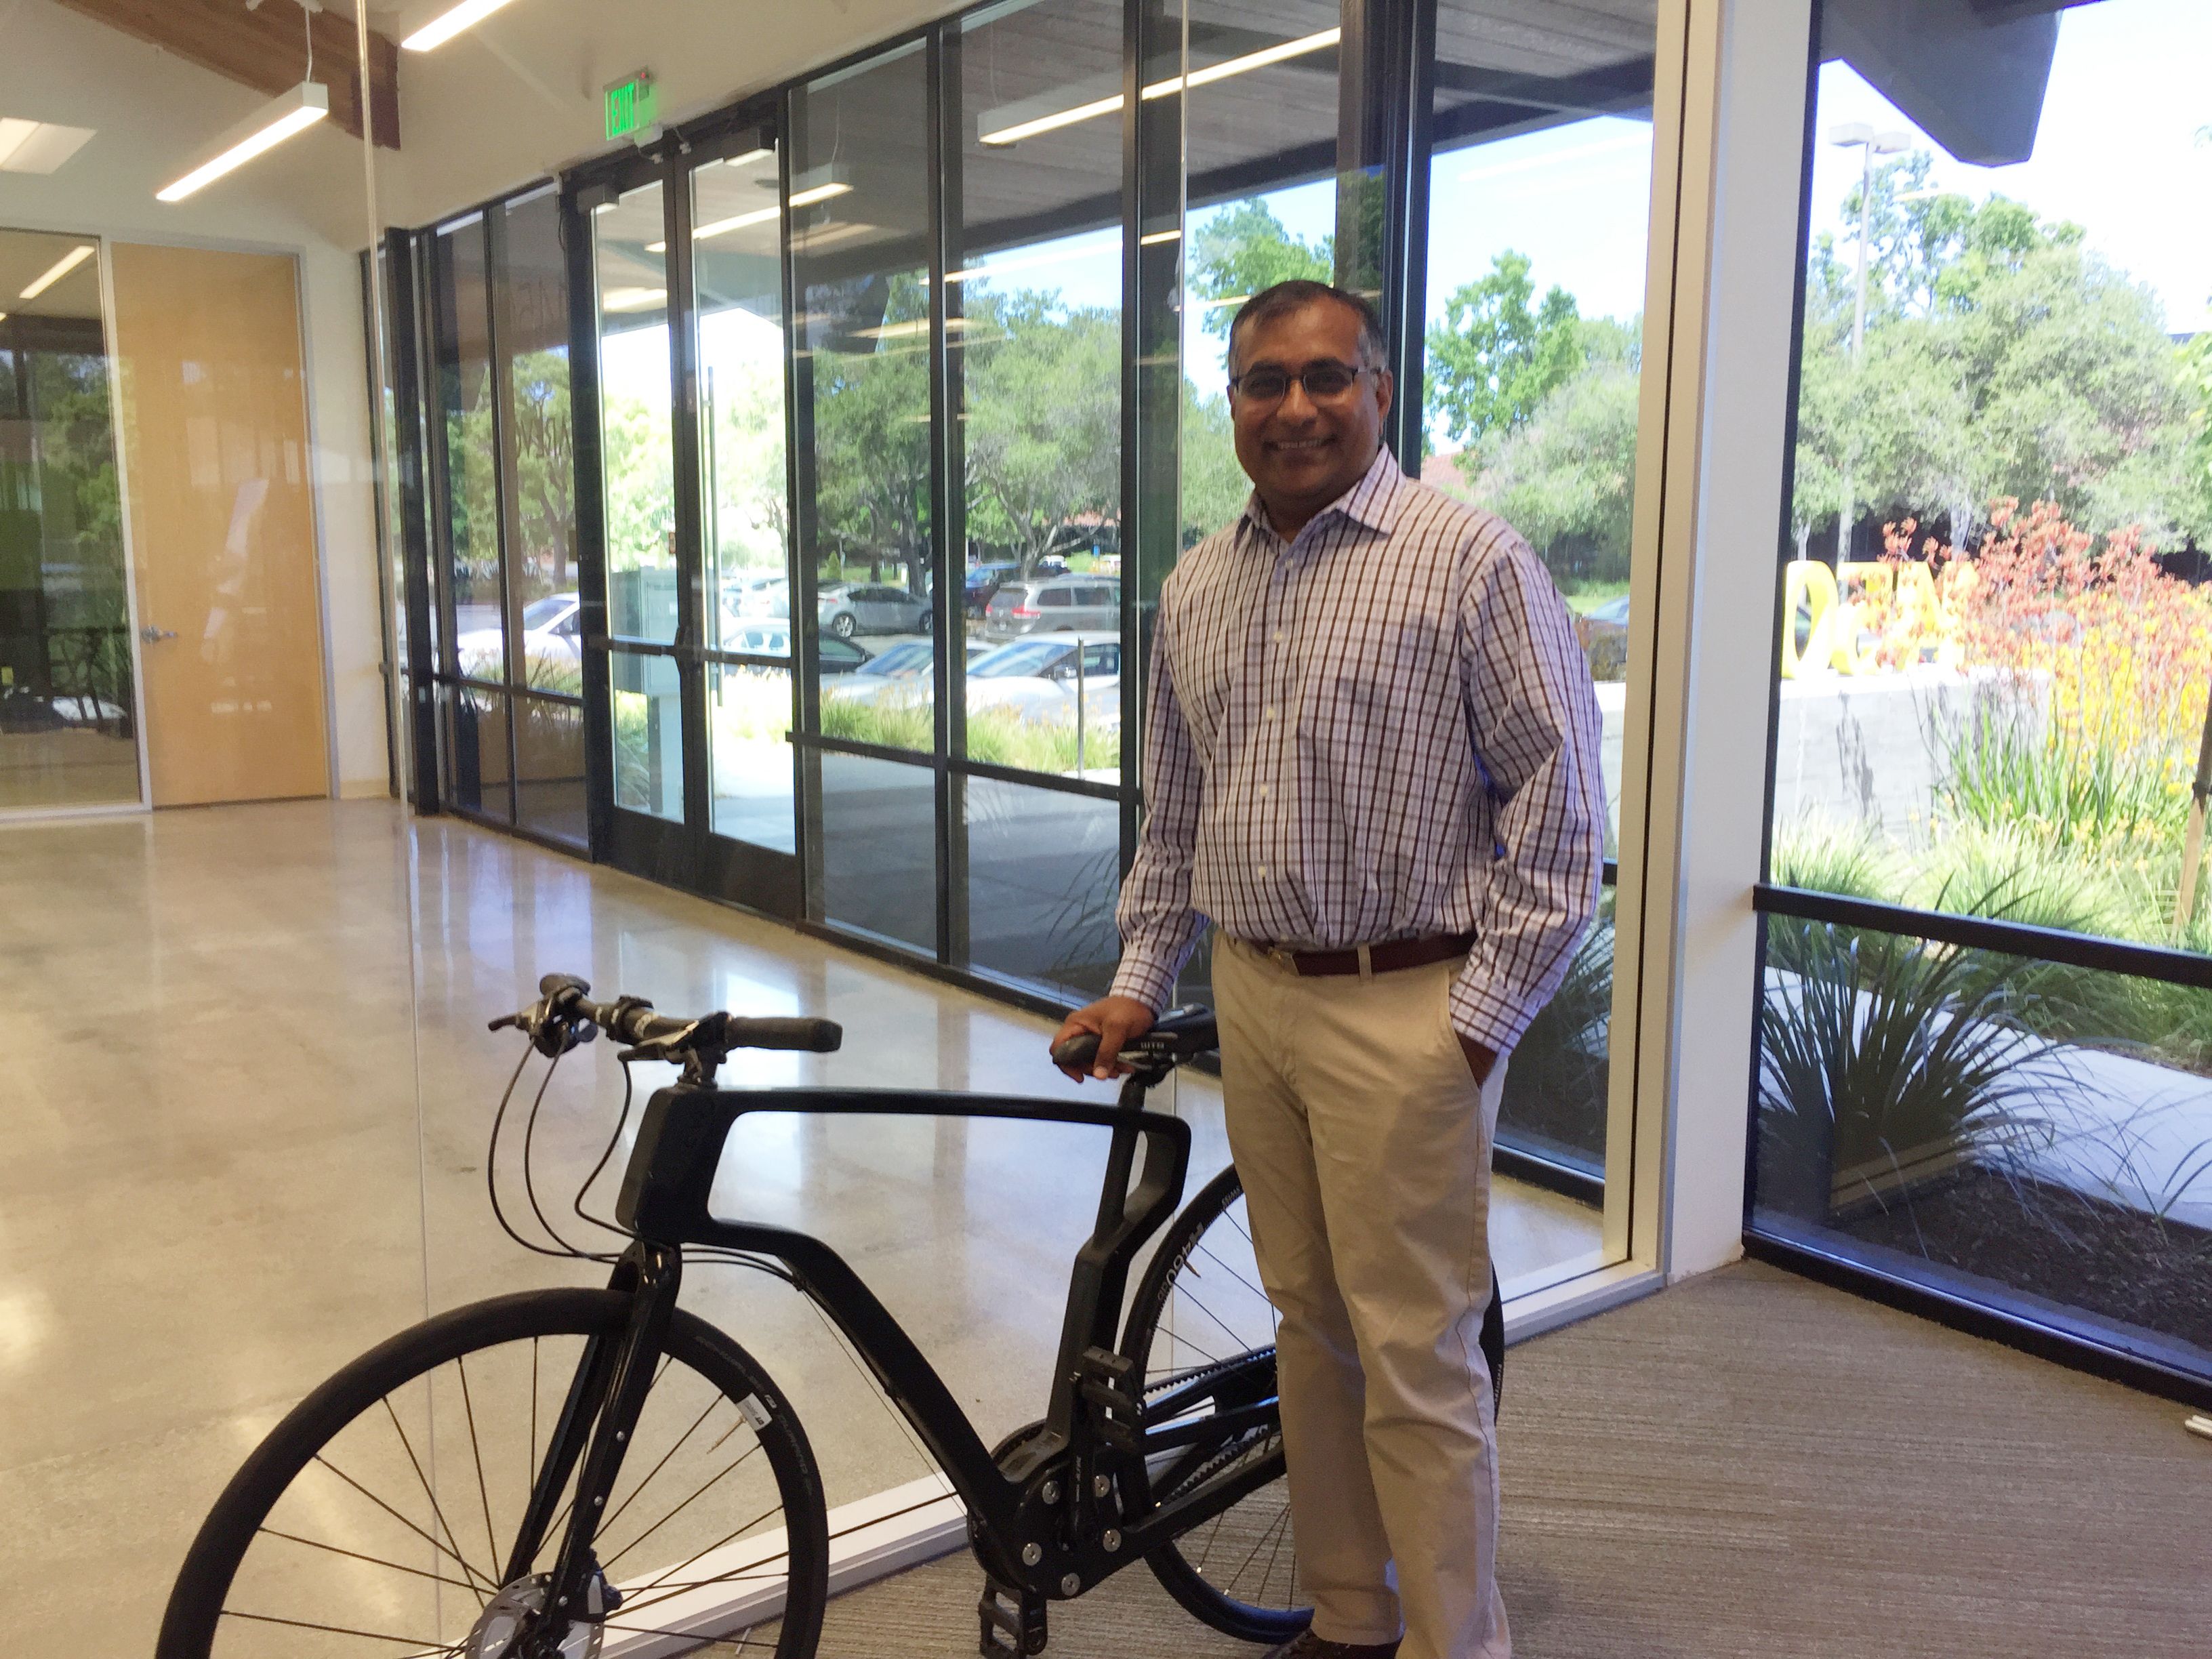 Image of Bheda in front of the bike with a 3D-printed carbon fiber composite frame.